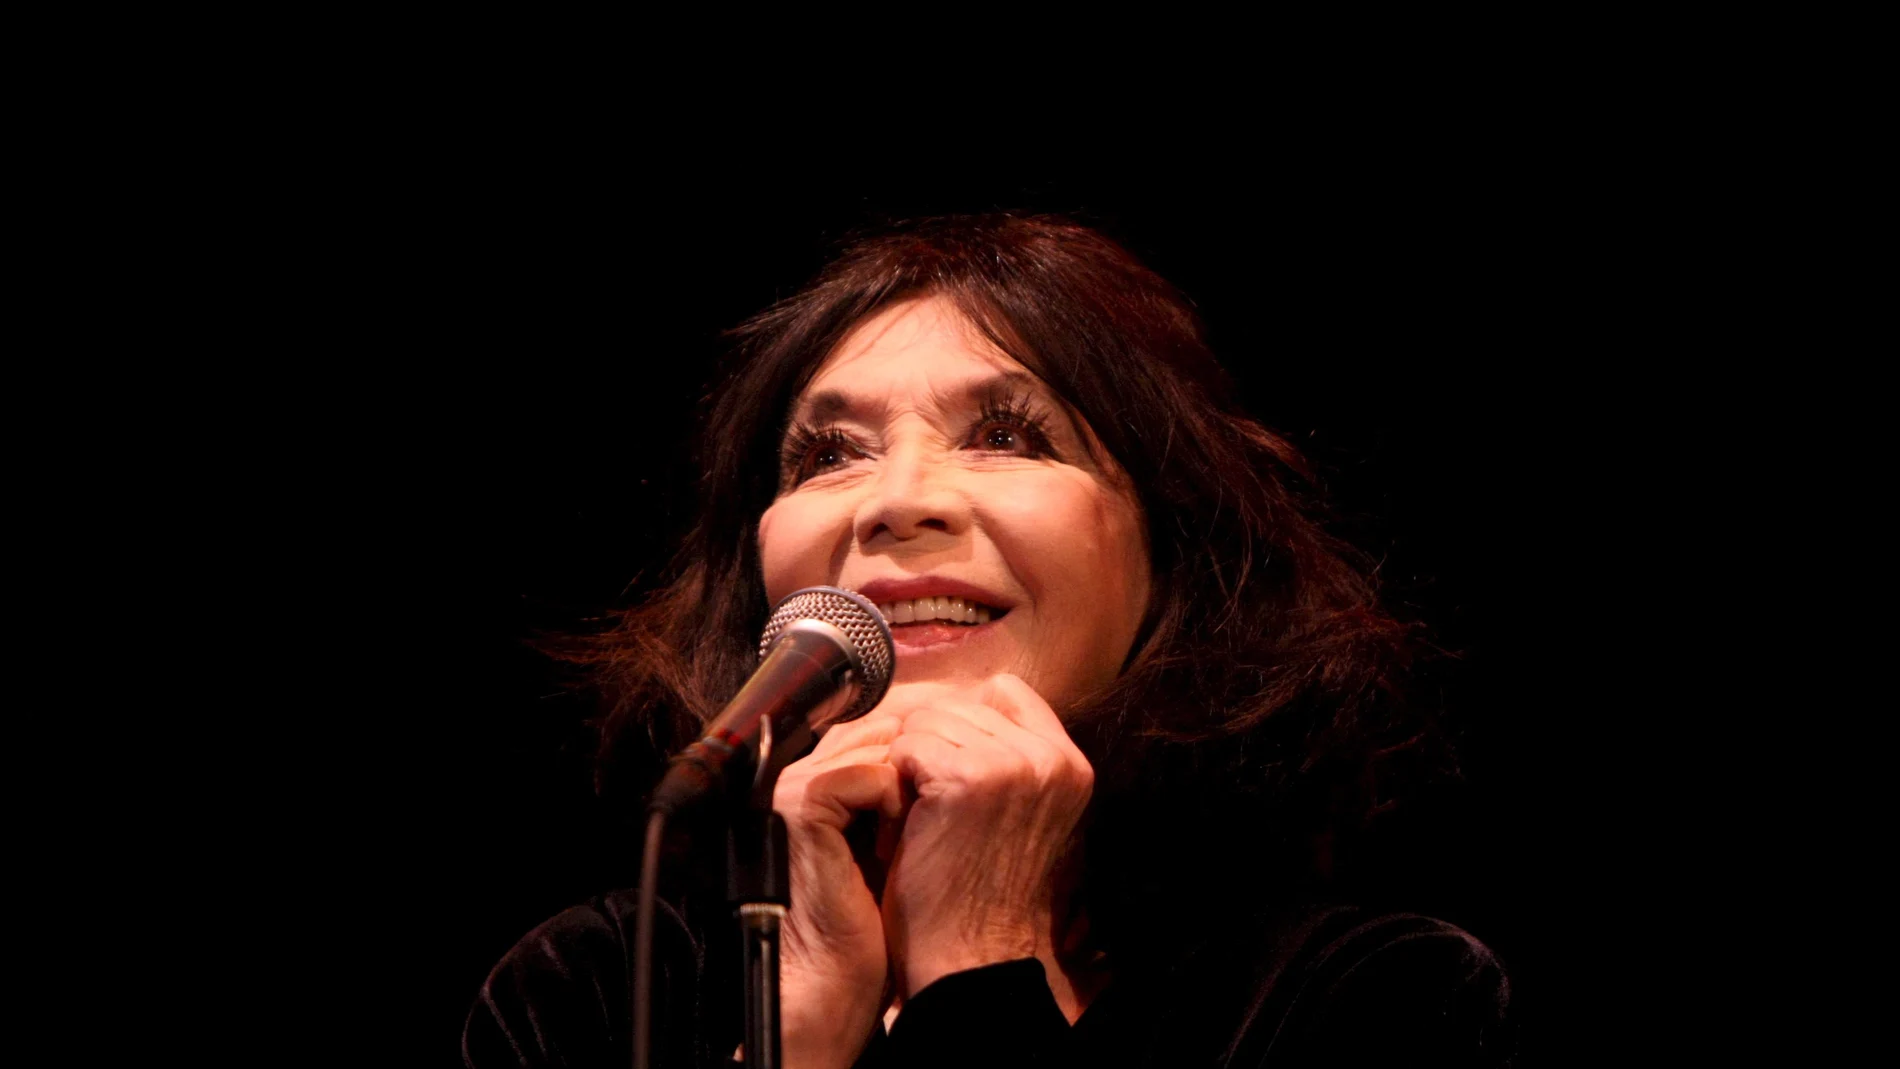 Warsaw (Poland), 20/03/2008.- (FILE) - French actress and songster Juliette Greco performs in Warsaw, Poland, 20 march 2008. According to reports Juliette Greco died aged 93 on 23 September 2020. (Francia, Polonia, Varsovia) EFE/EPA/LESZEK SZYMANSKI POLAND OUT